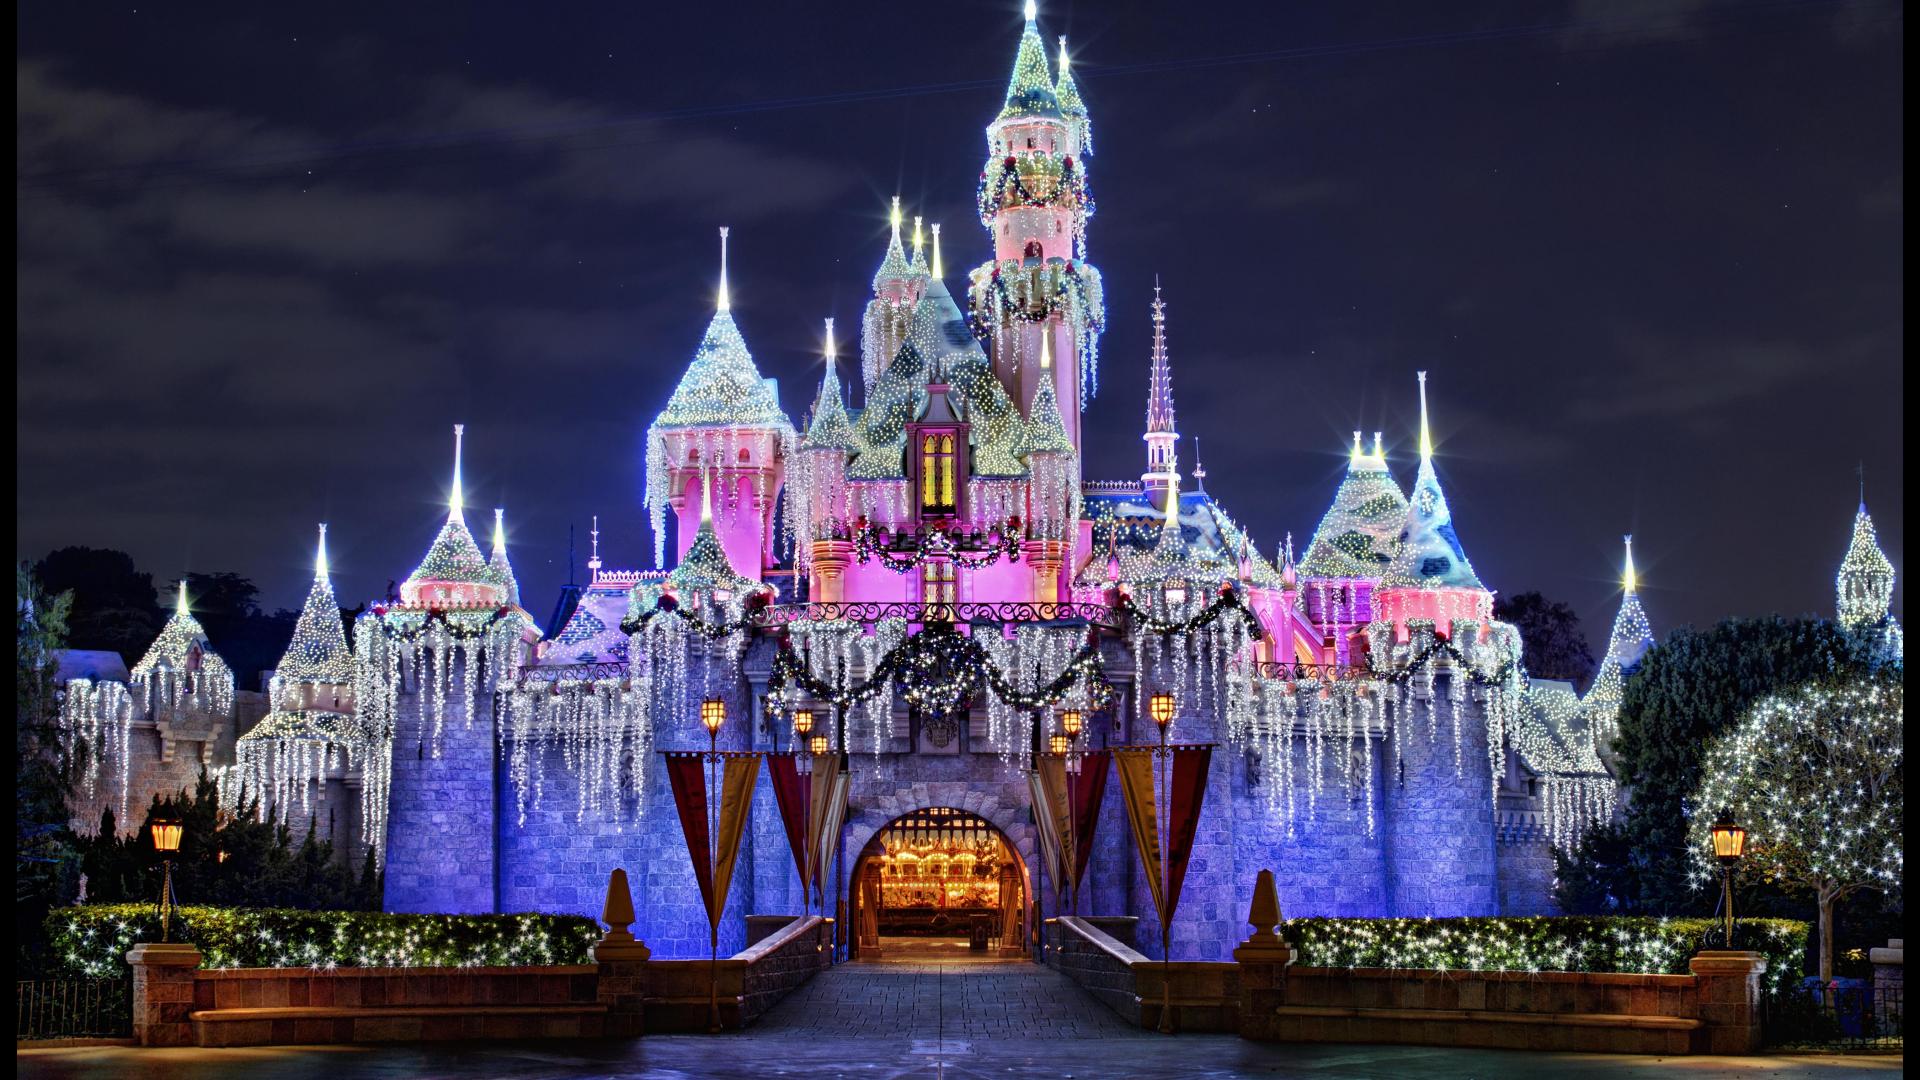 The Sleeping Beauty Castle is lit up for the holidays at Disneyland Park. - Disneyland